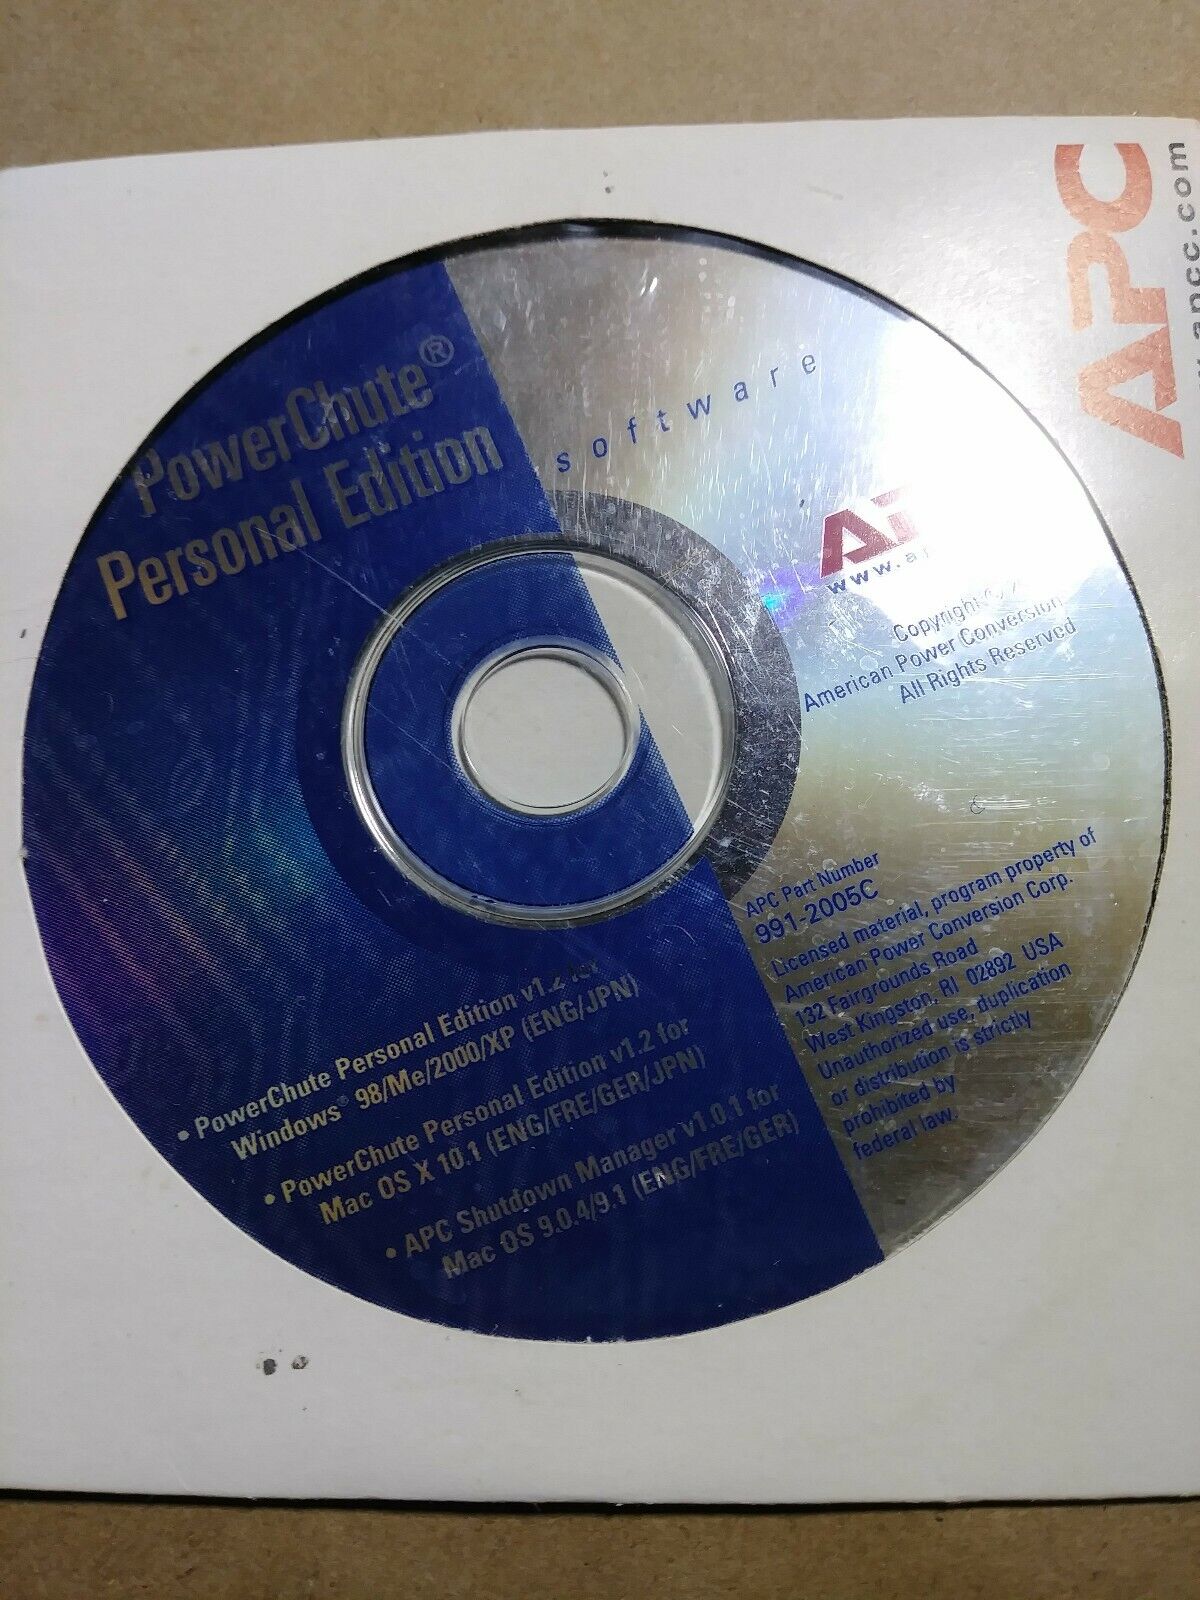 A pc Powechute Personal Edition CD